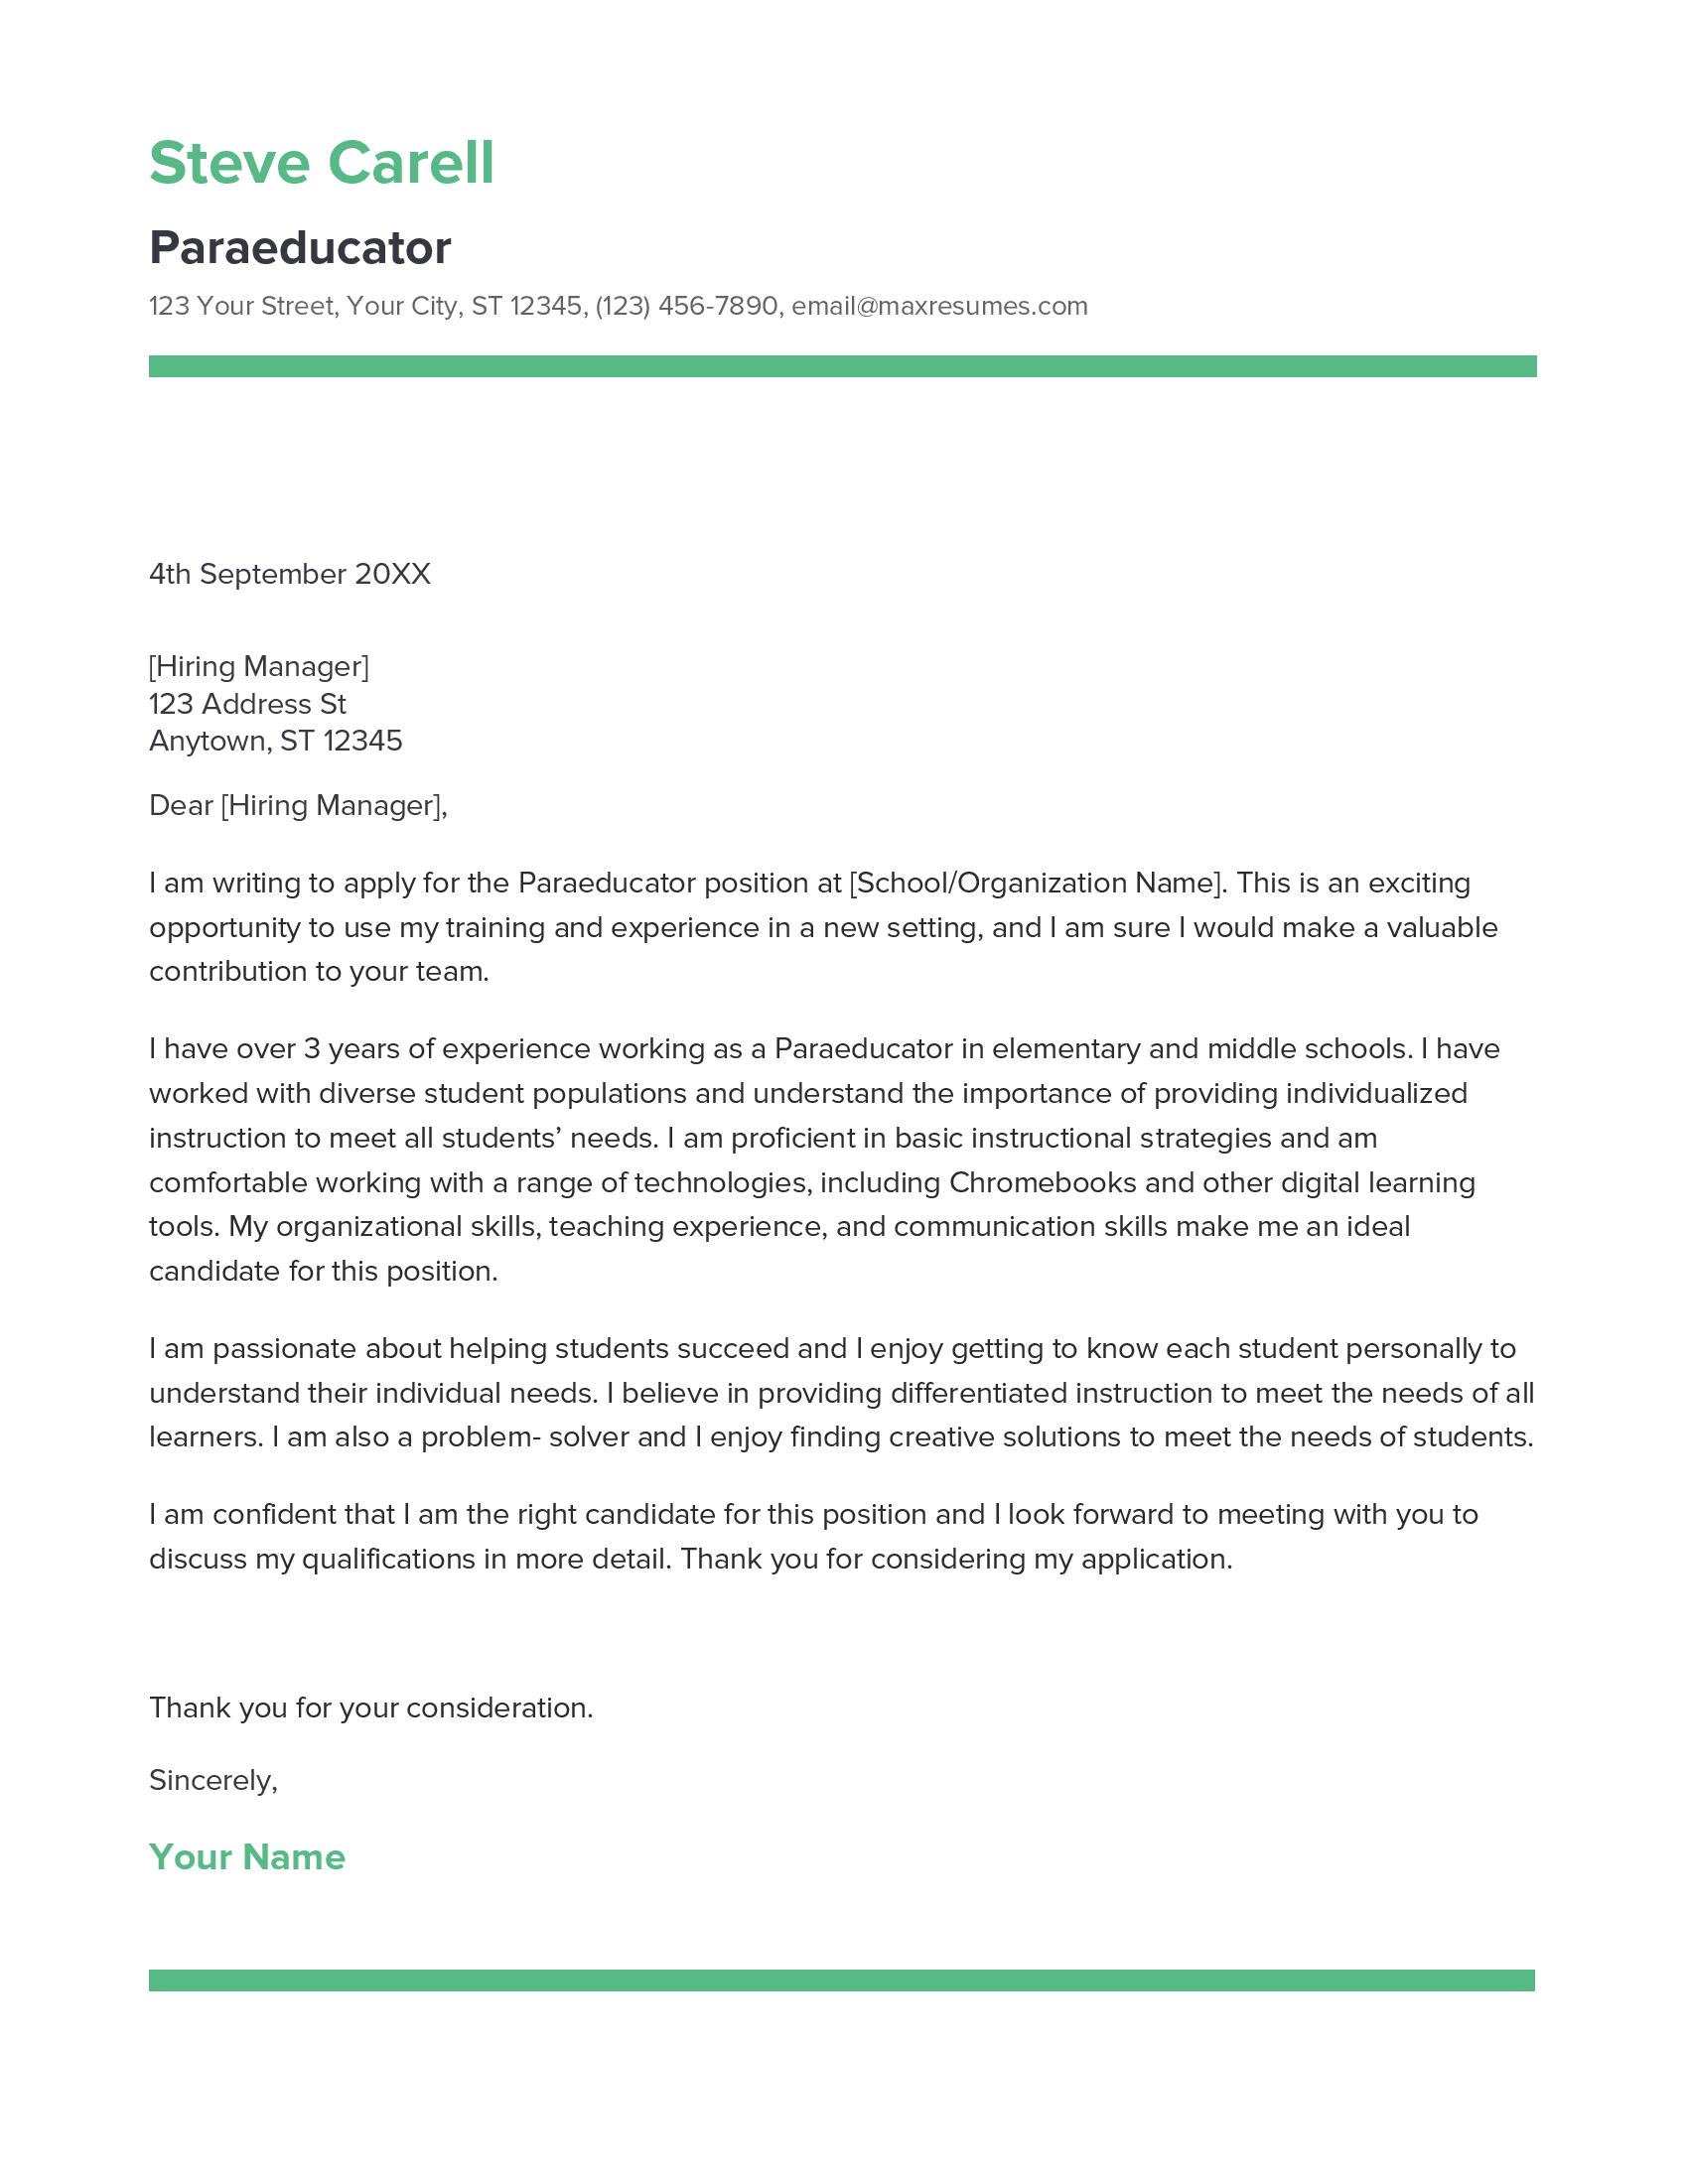 Paraeducator Cover Letter Example